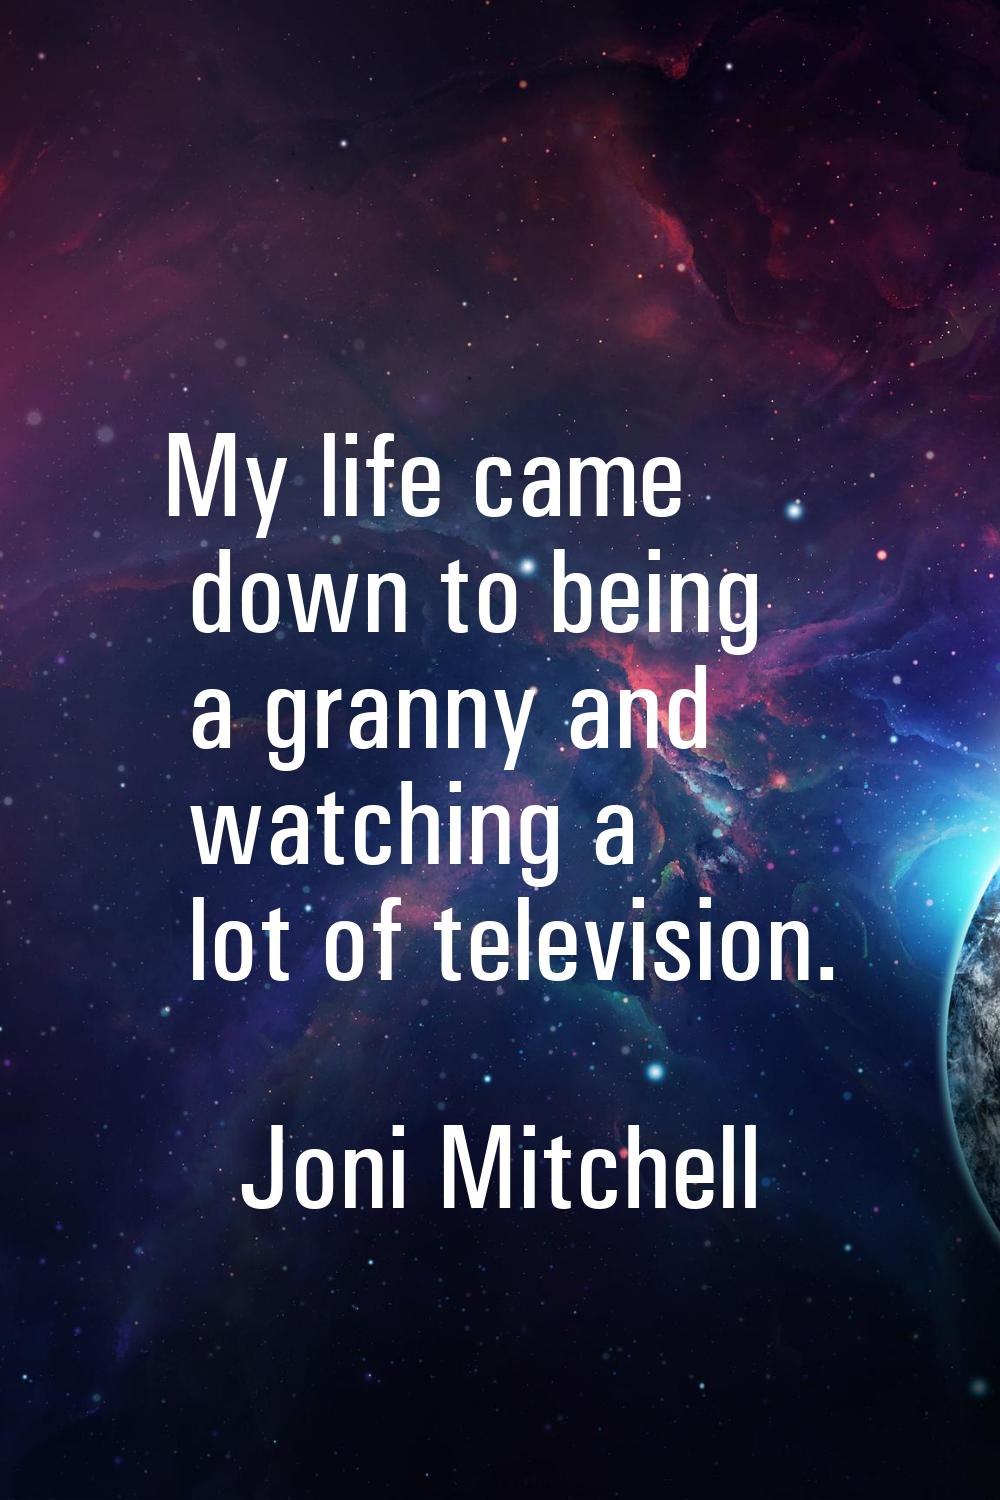 My life came down to being a granny and watching a lot of television.